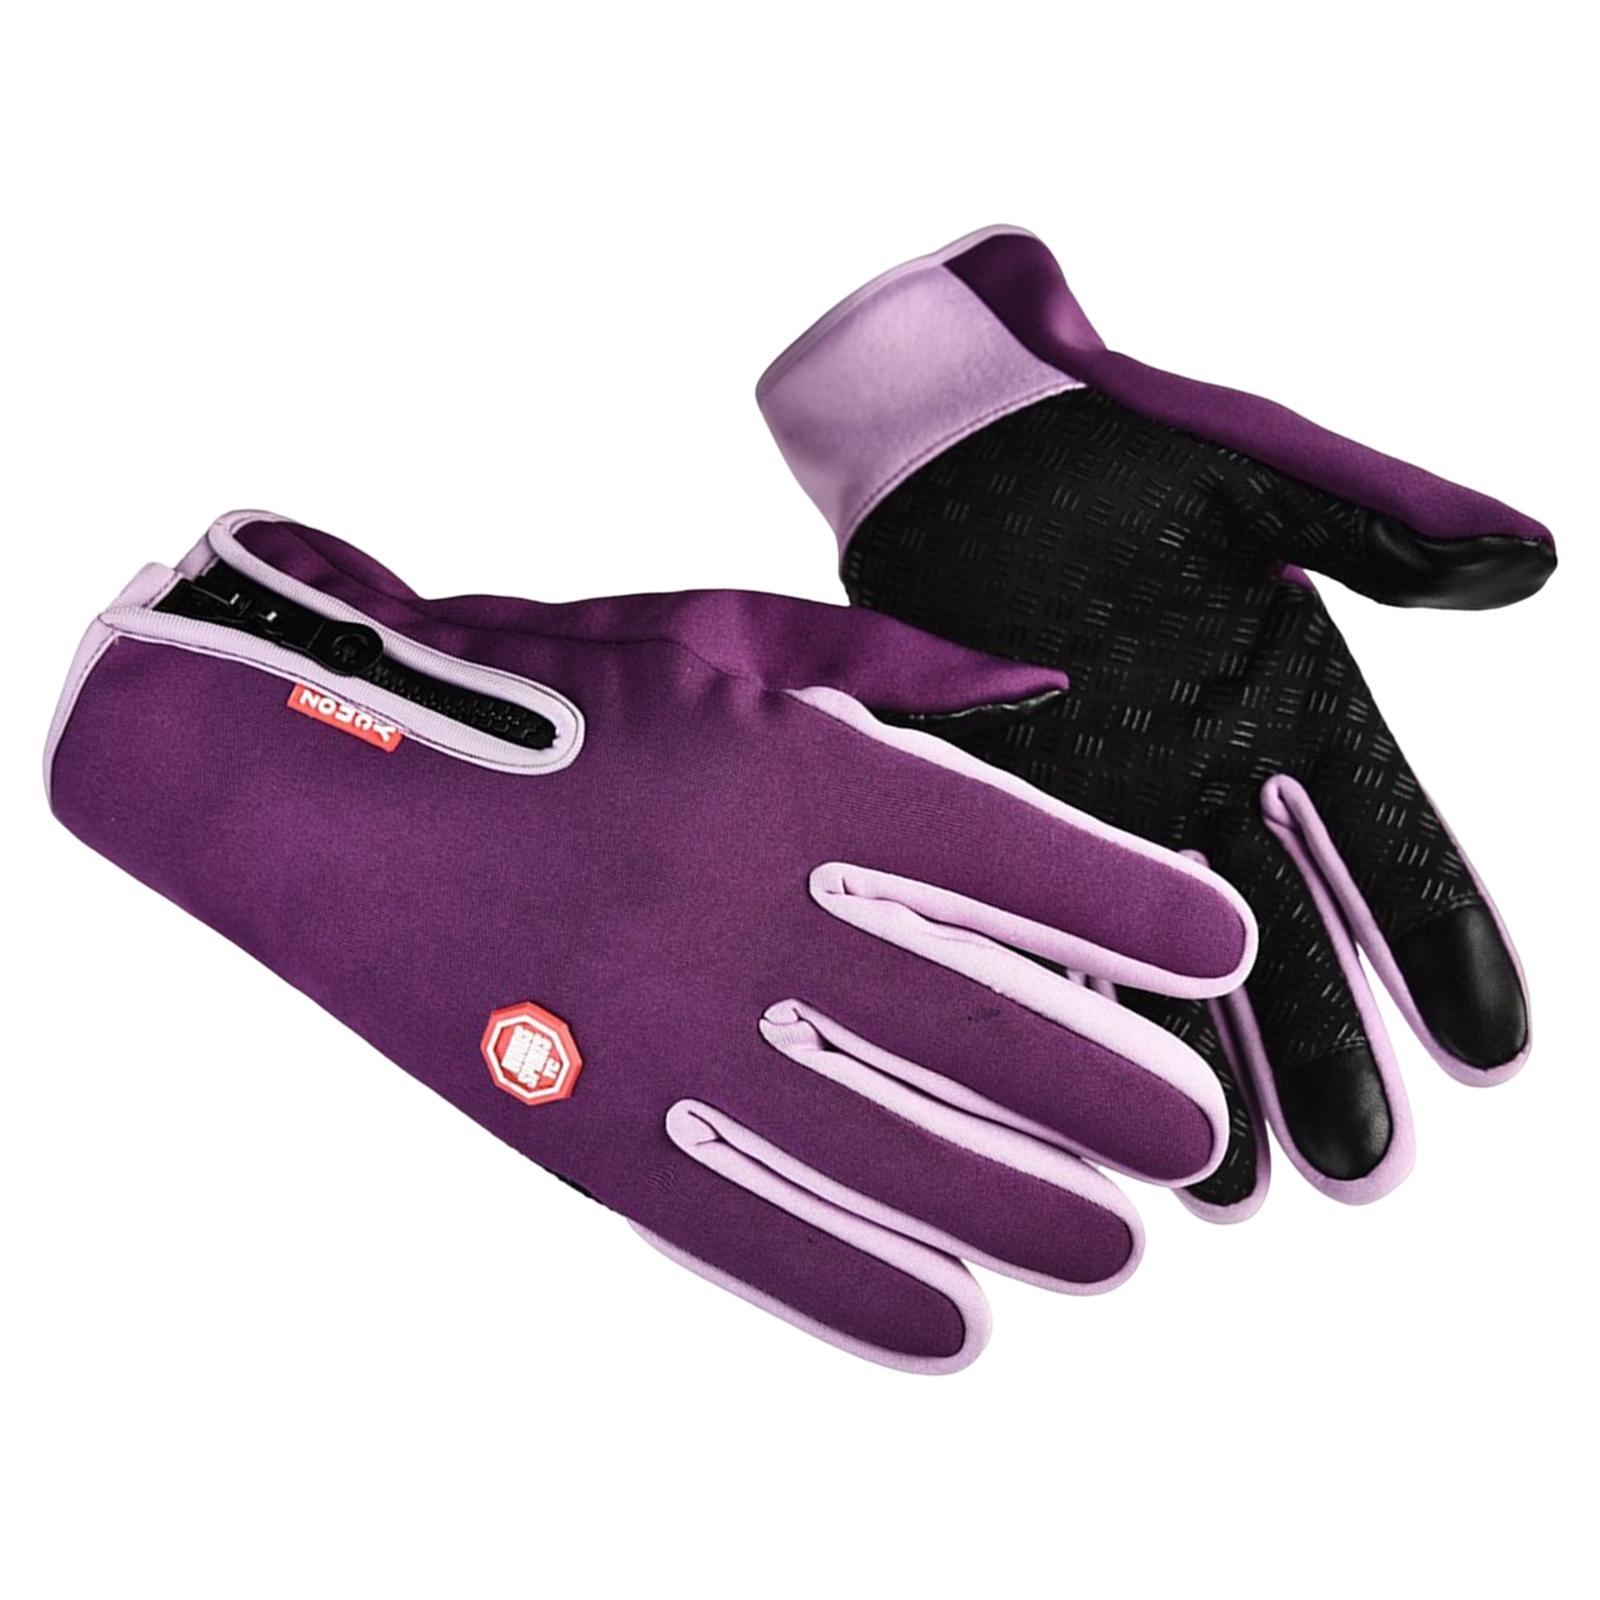 Winter Gloves Nonslip Thermal Gloves for Outdoor Running Sports Motorcycle XL Purple